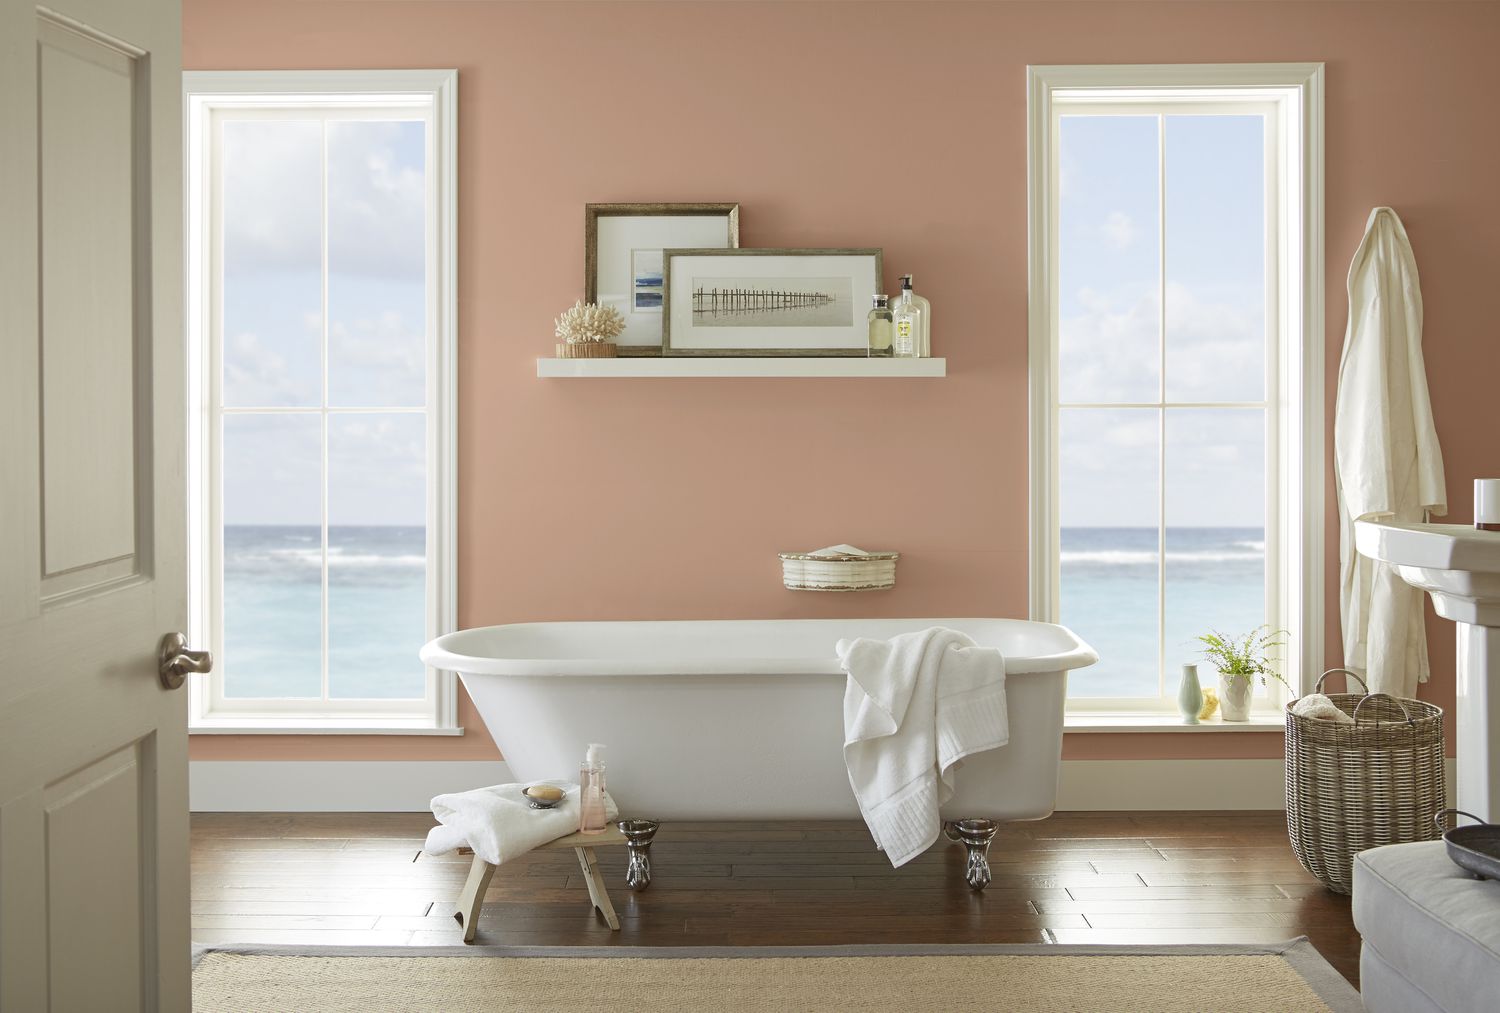 Behr Canyon Dusk 2021 color of the year on wall of bathroom